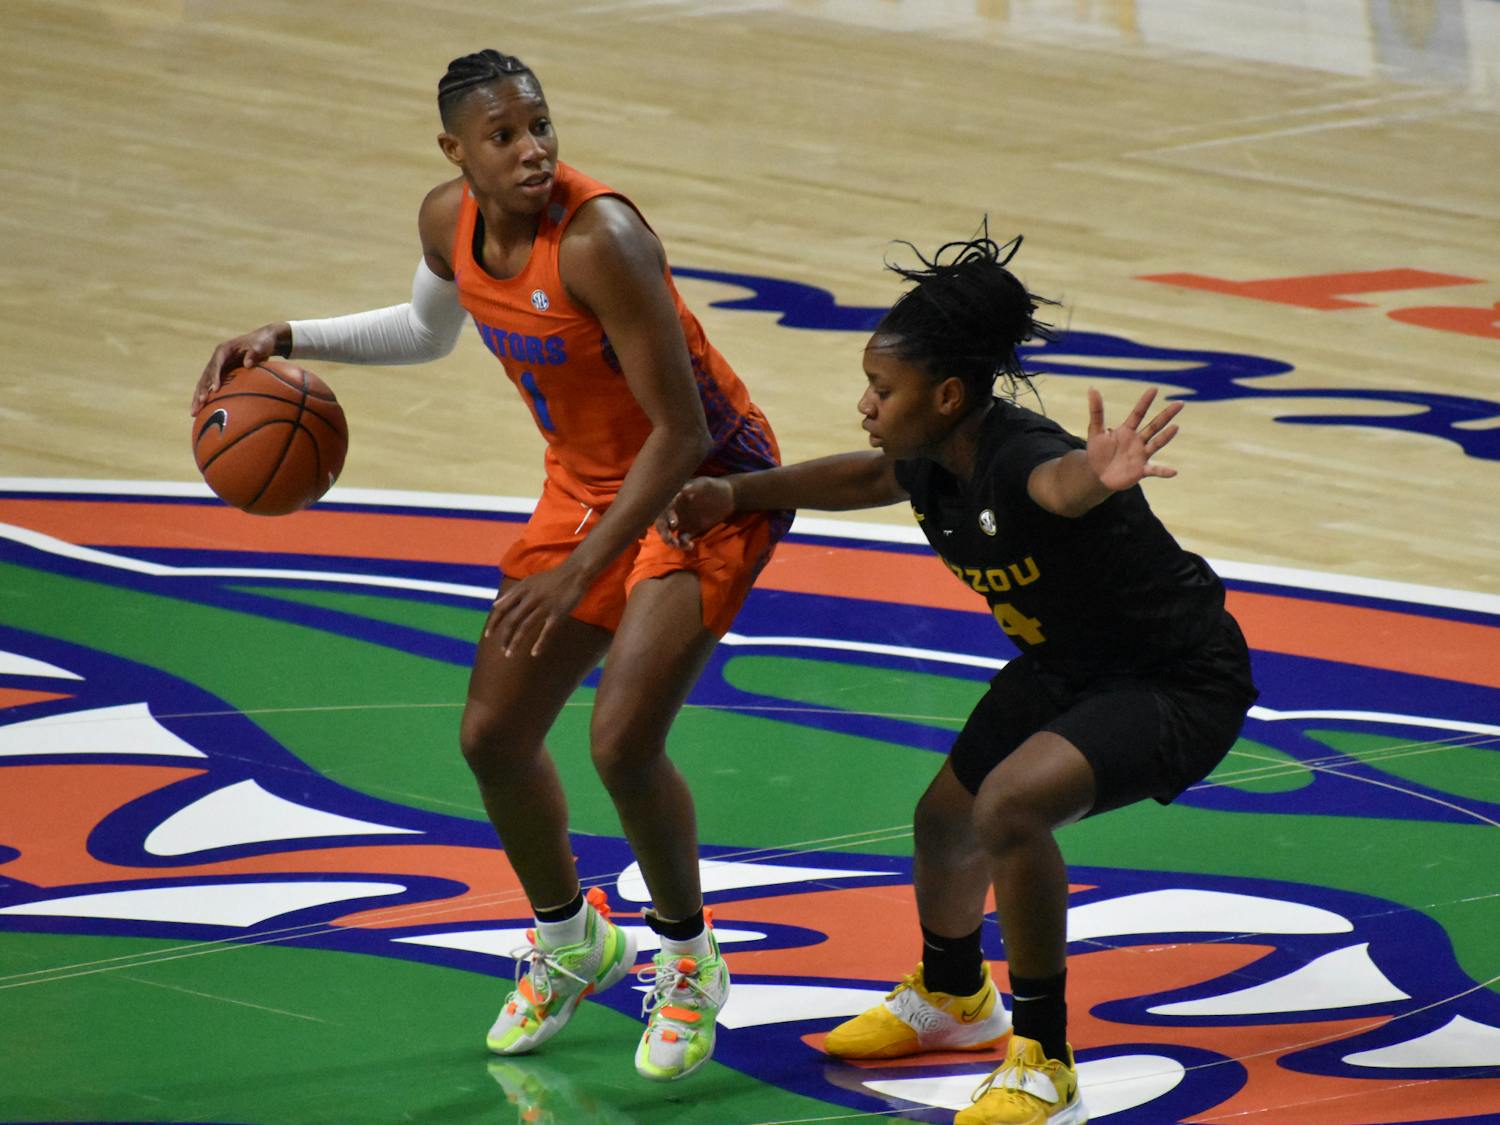 Smith hit a career-high 34 points Sunday. Photo from January UF-Mizzou game.